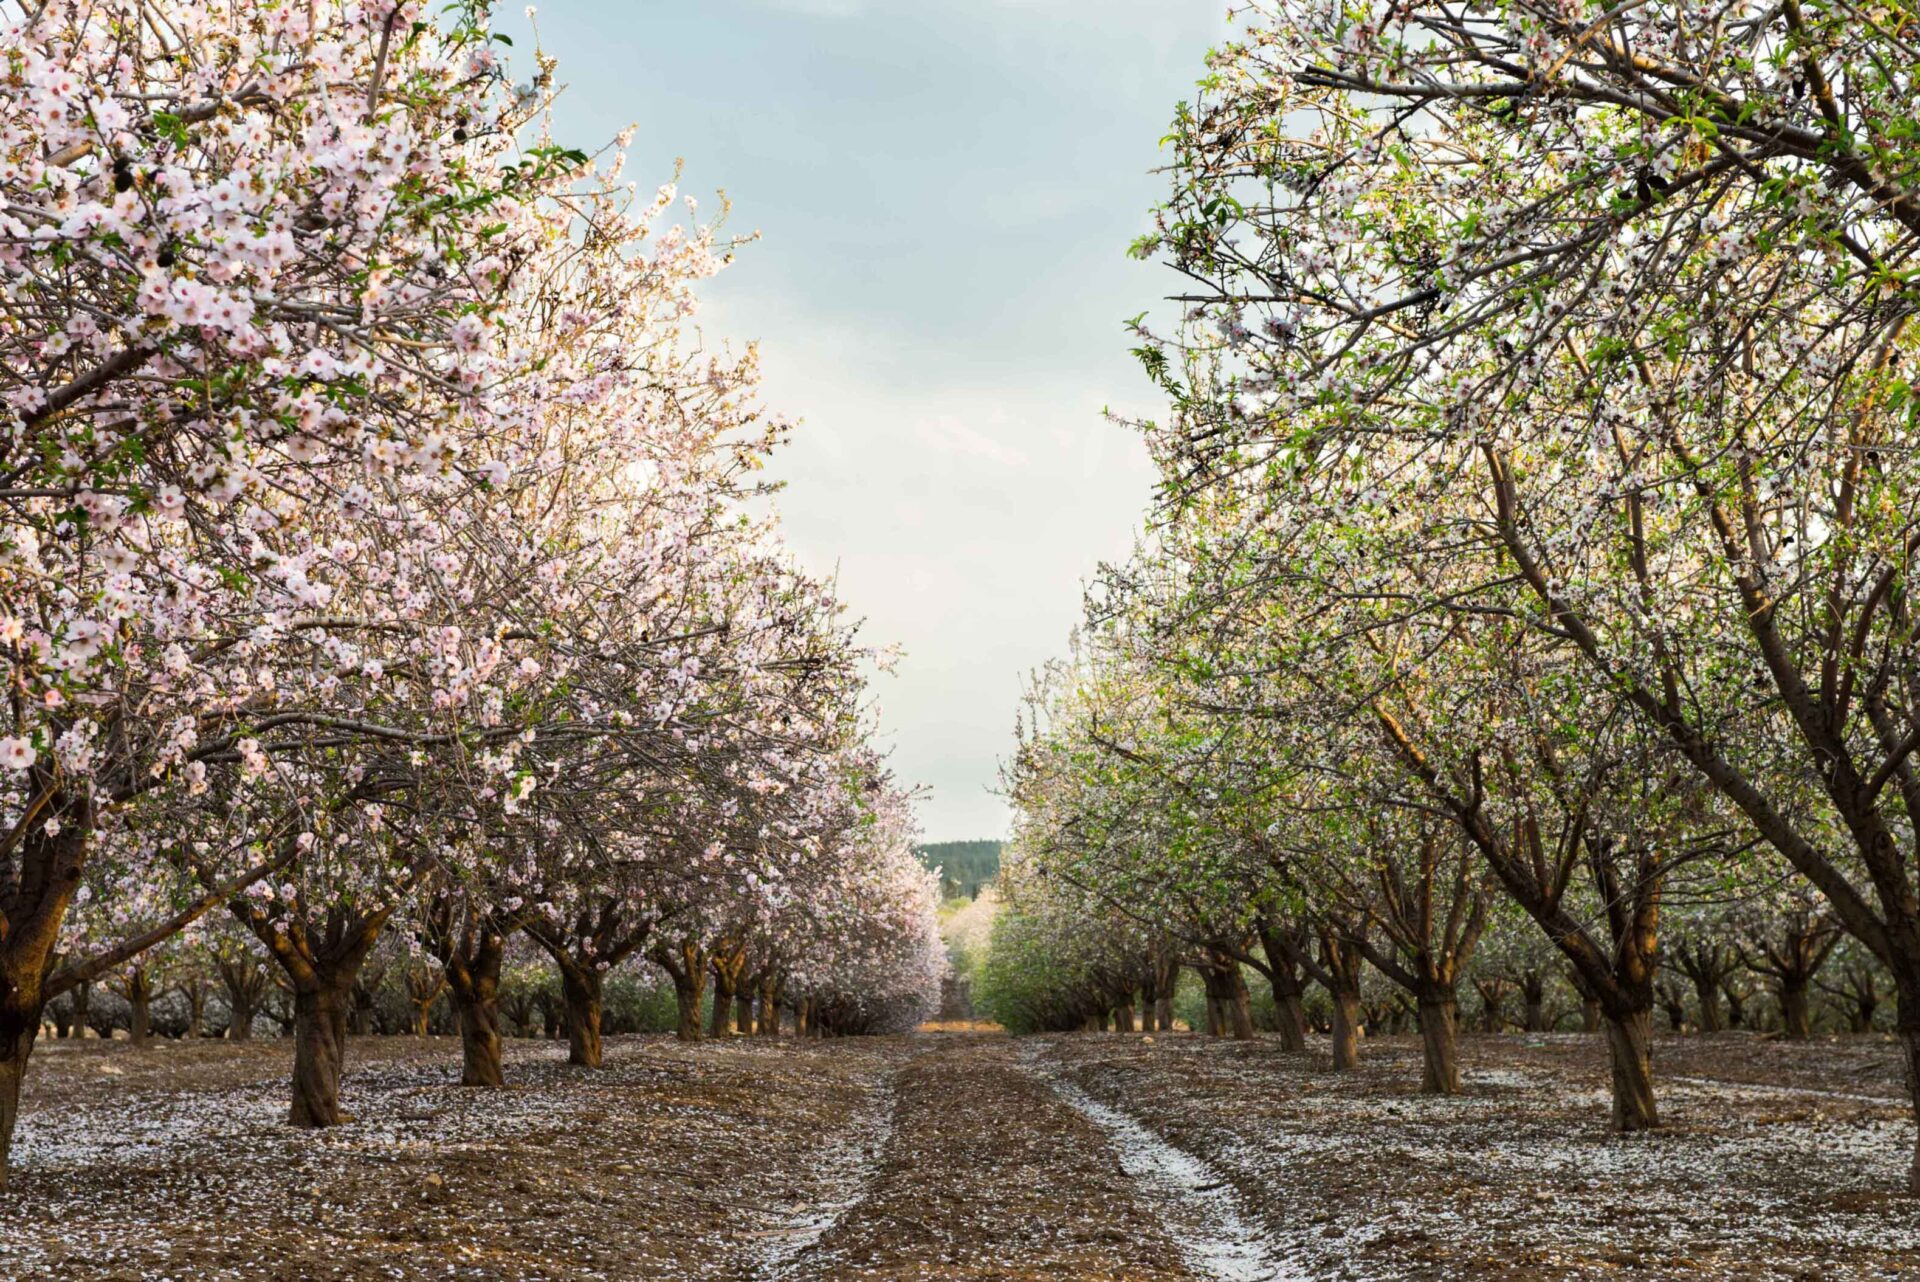 Best Management Practices for Fungal Disease in Almonds